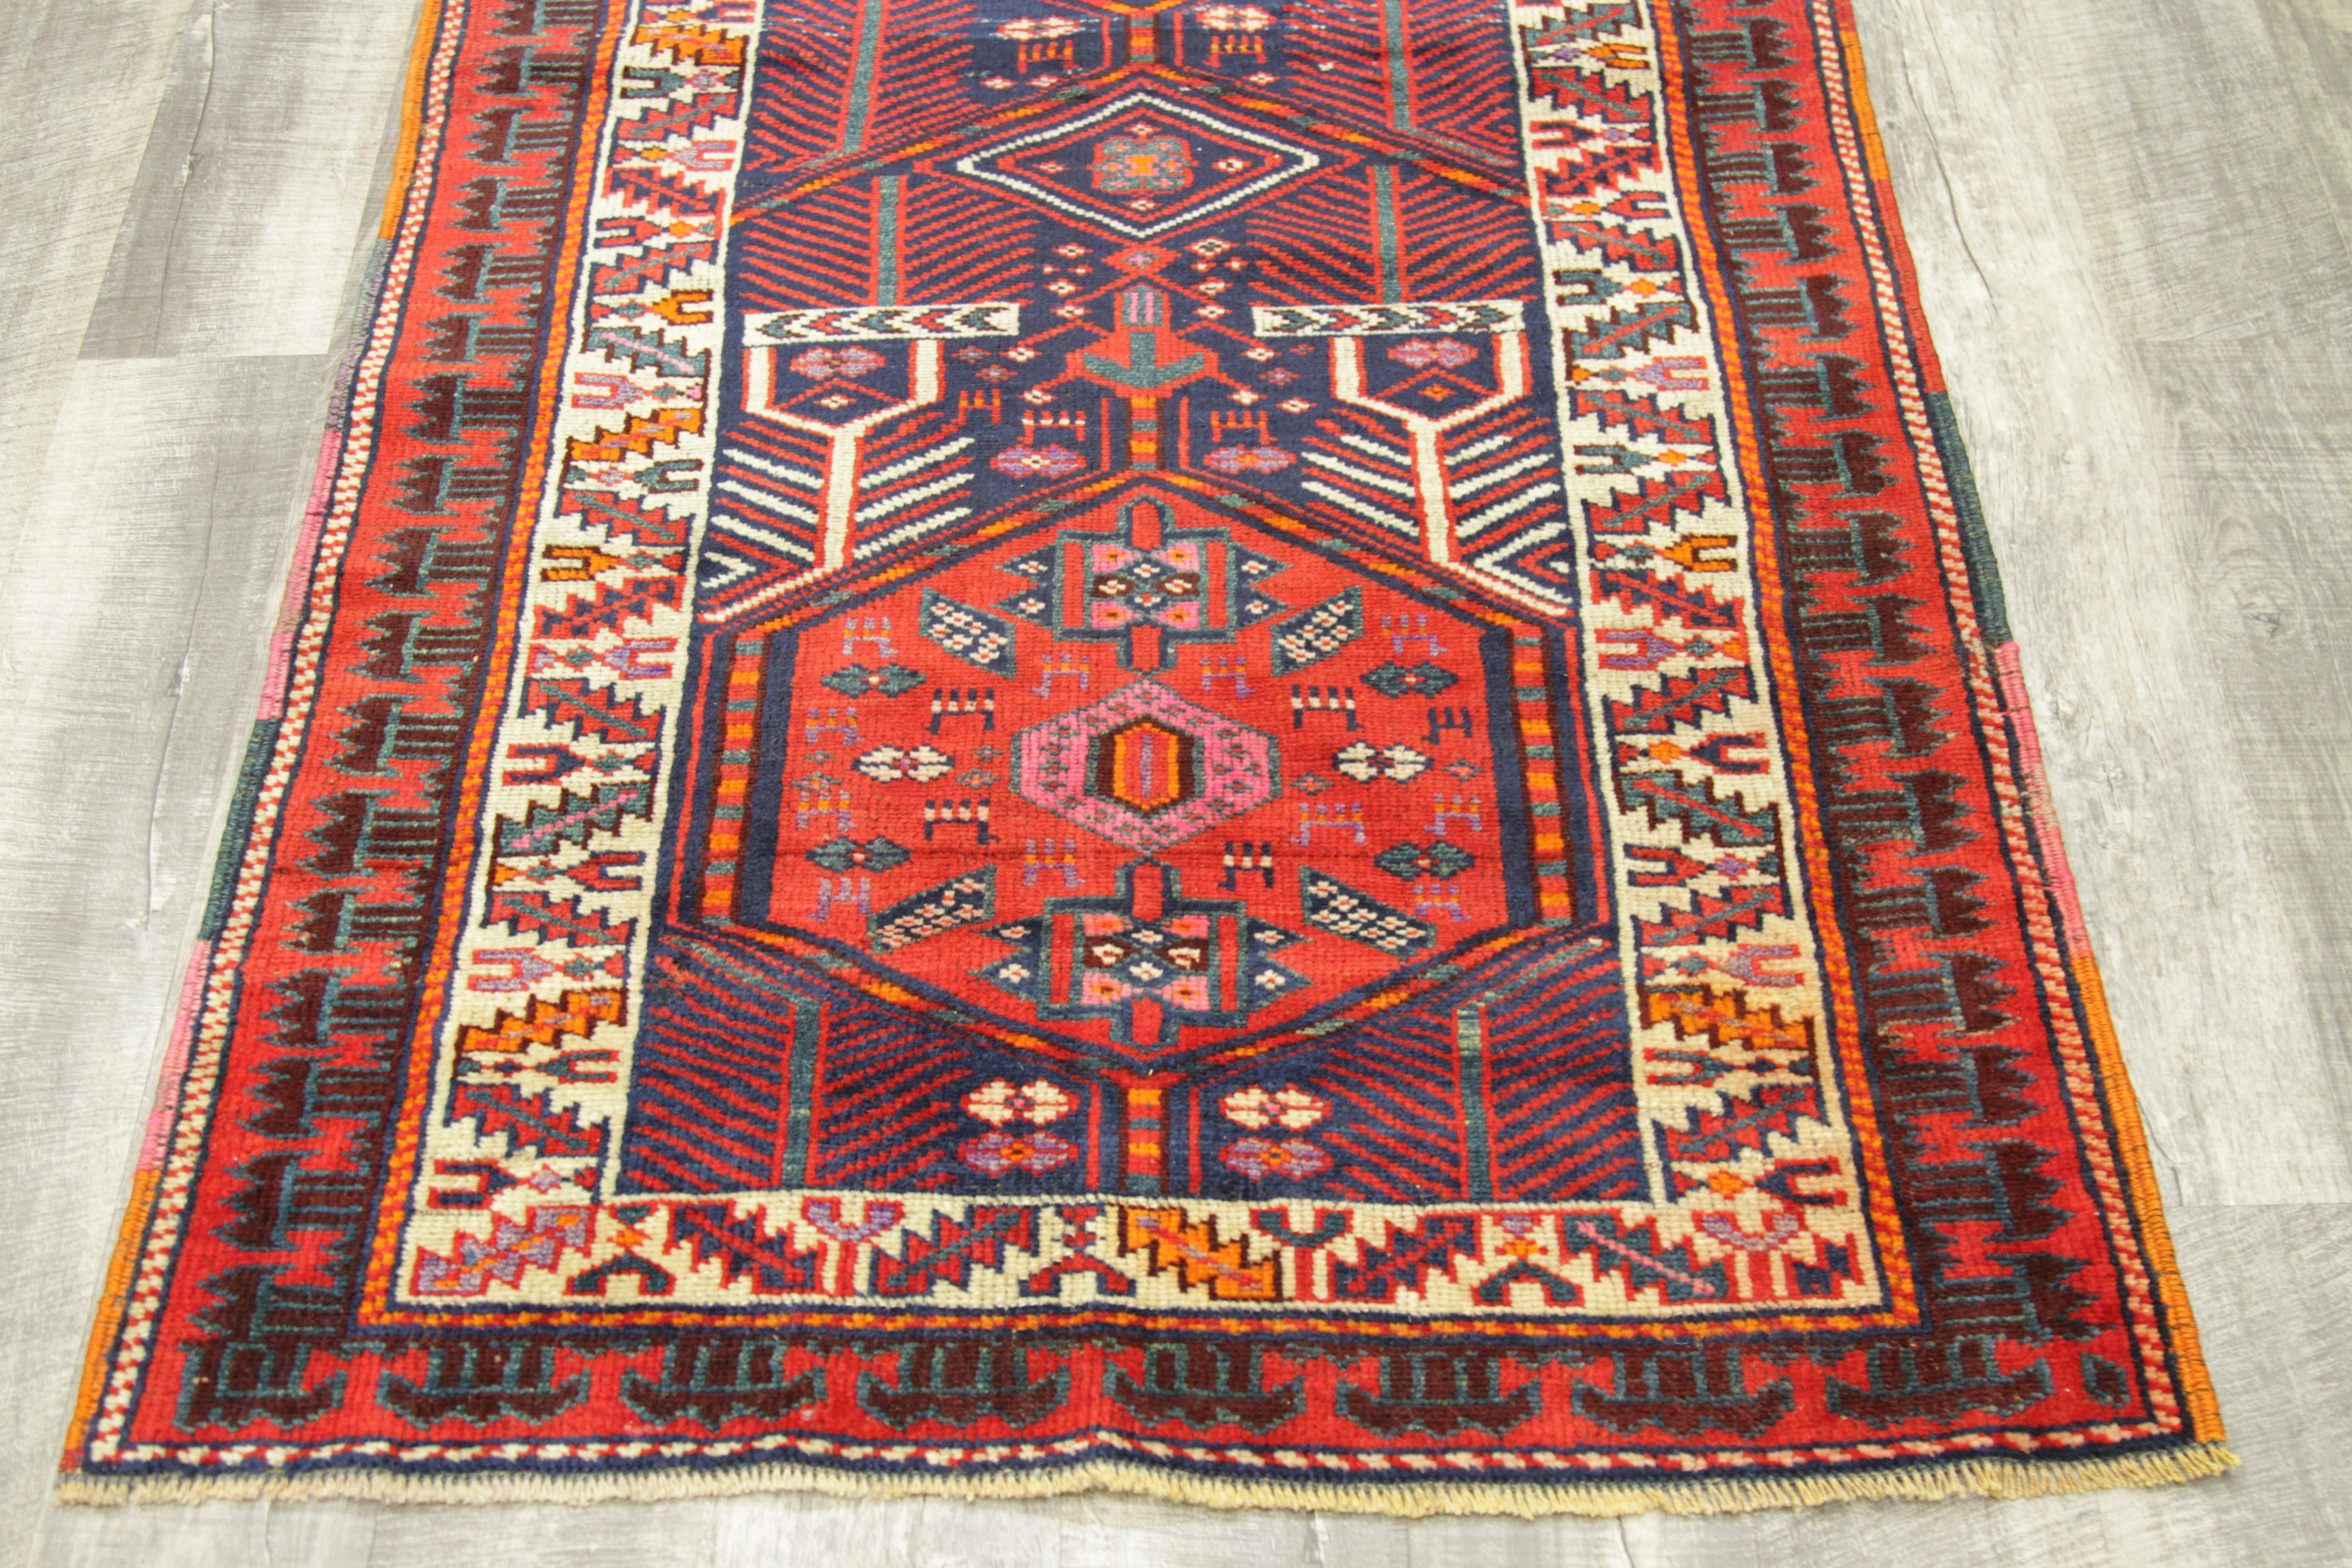 1900s Antique Persian Rug in Azerbaijan Design with Extended Length For Sale 14